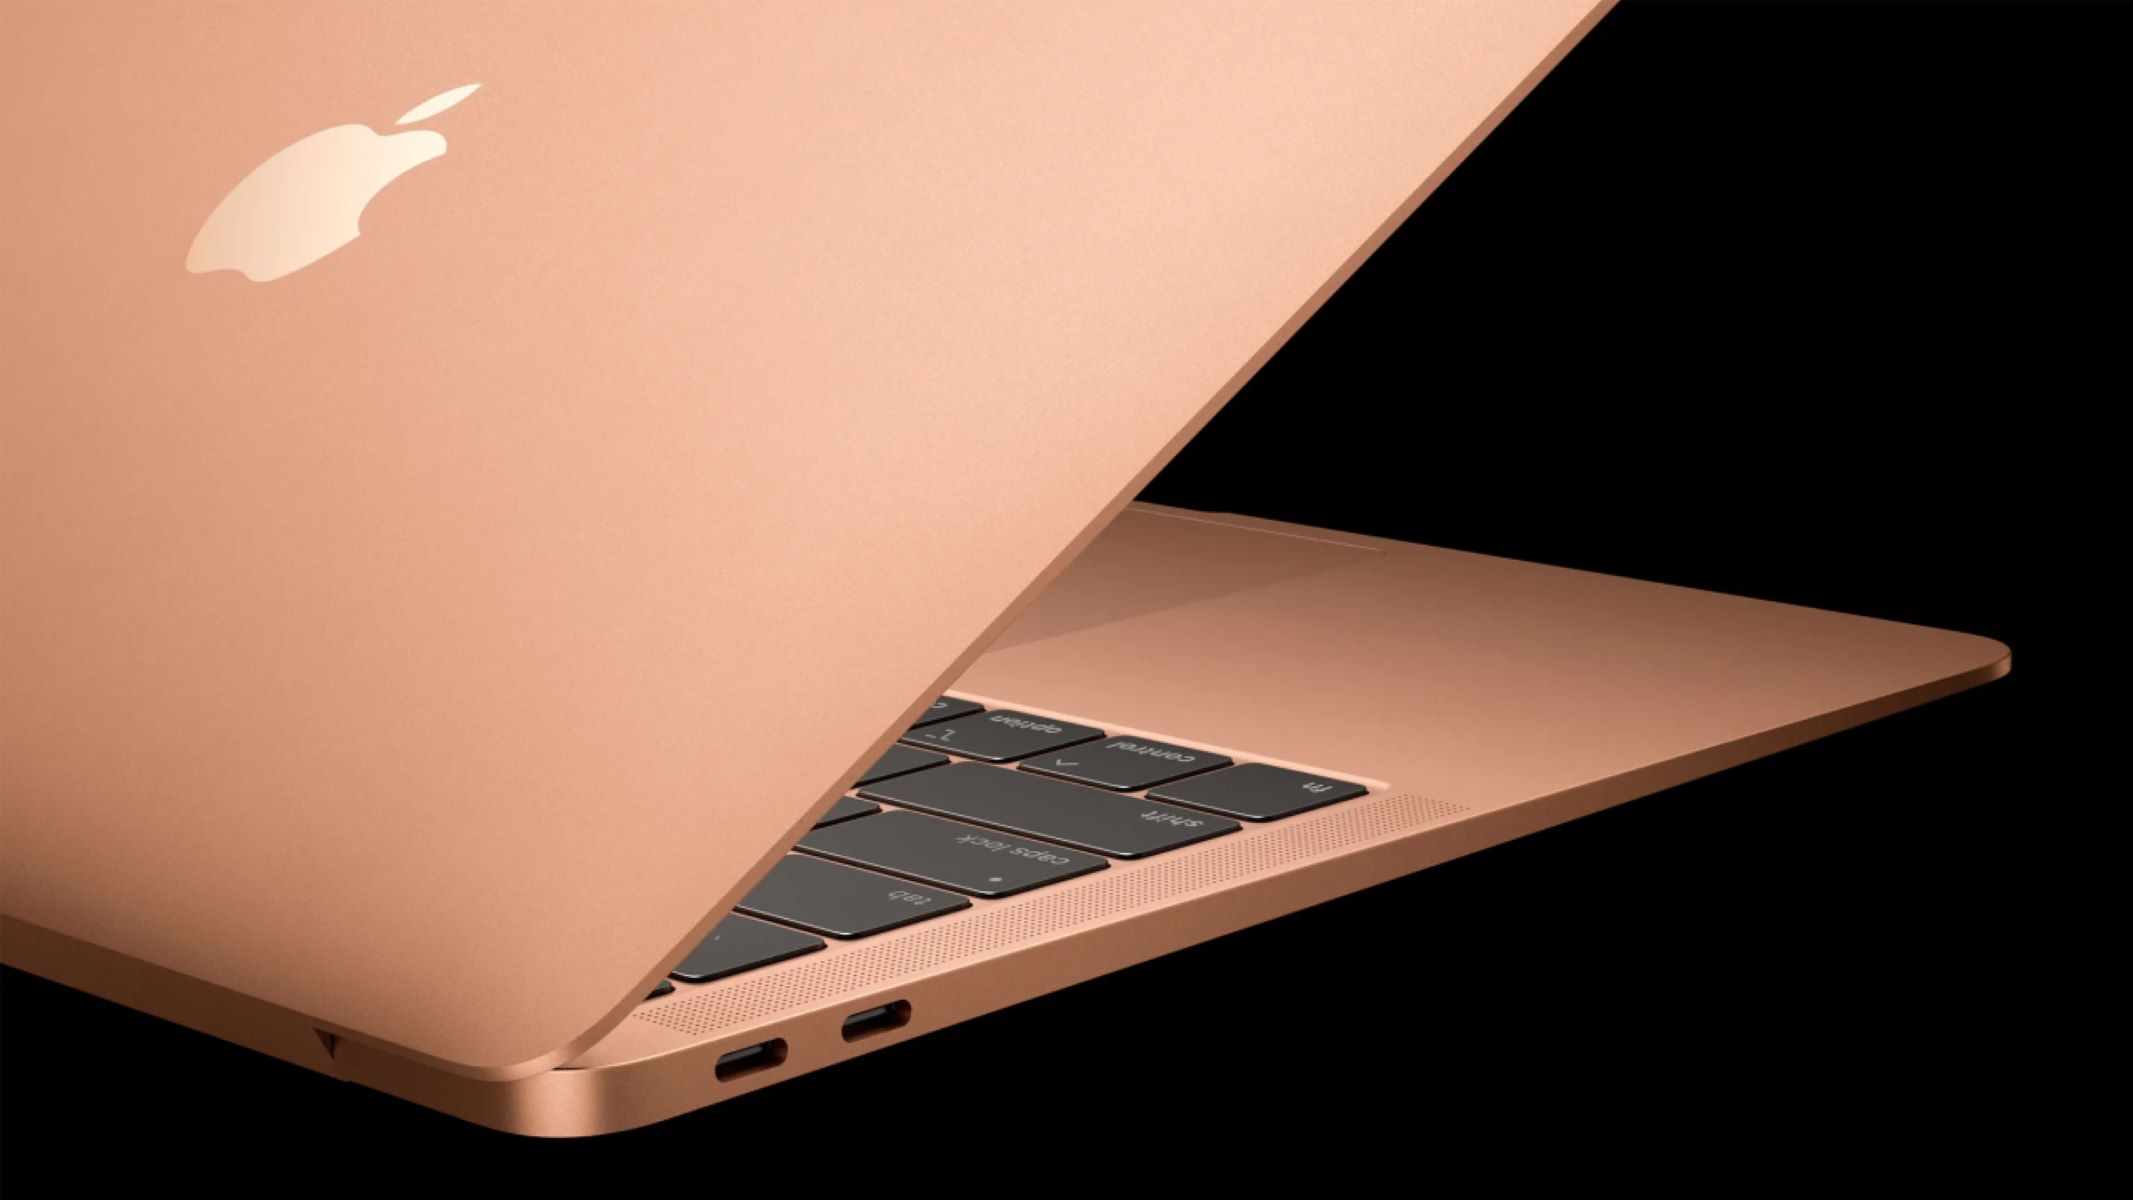 MacBook Limitations: Understanding Why MacBooks Do Not Have Touchscreens